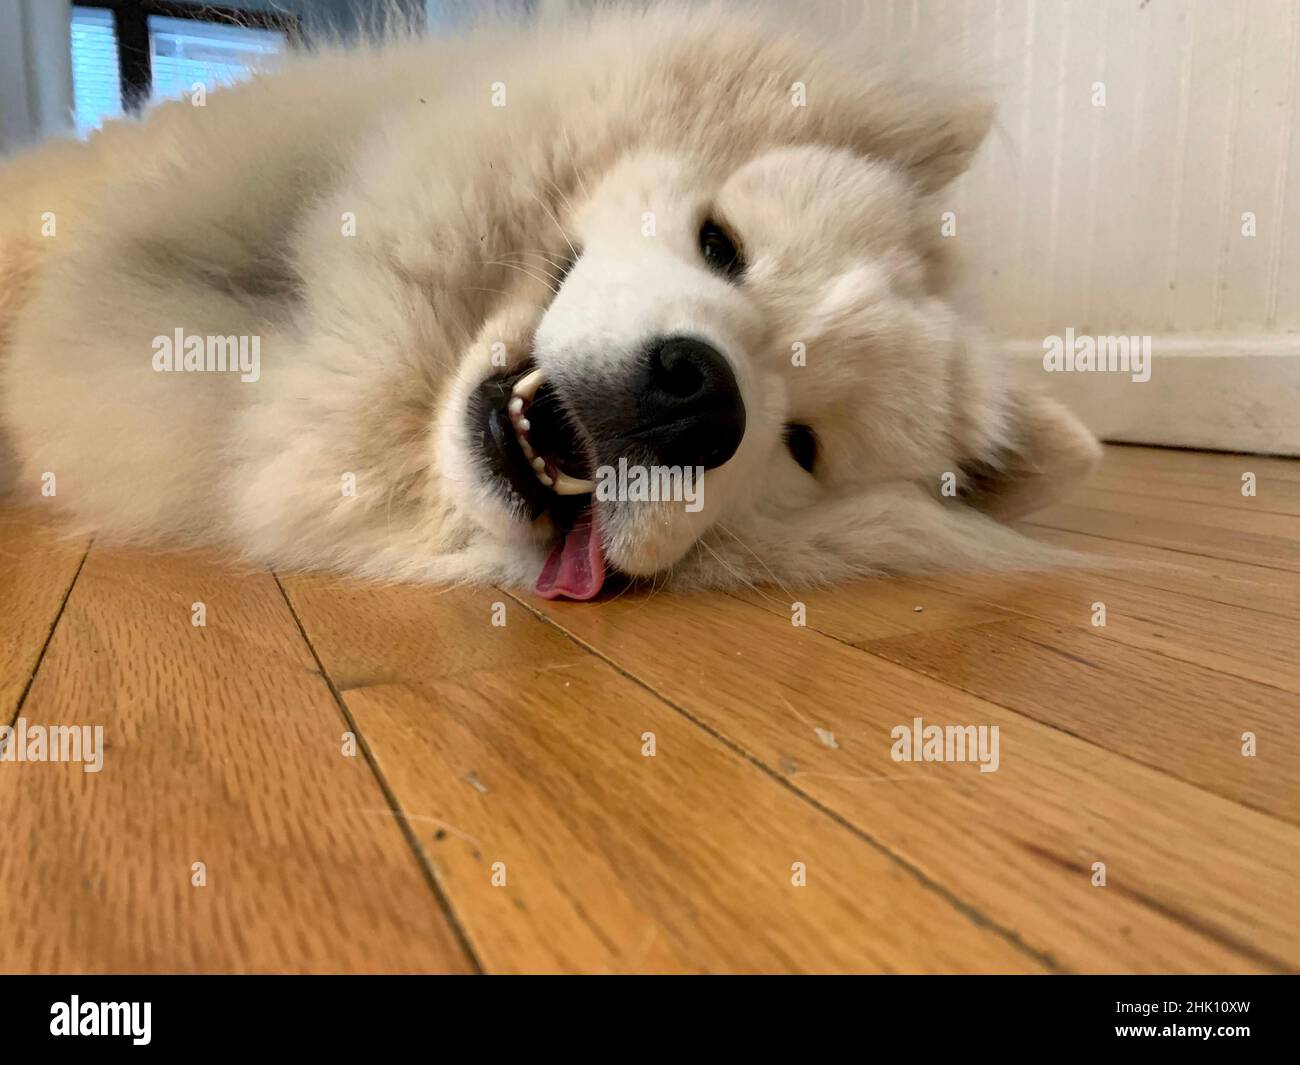 cute samoyed dog with tongue out Stock Photo